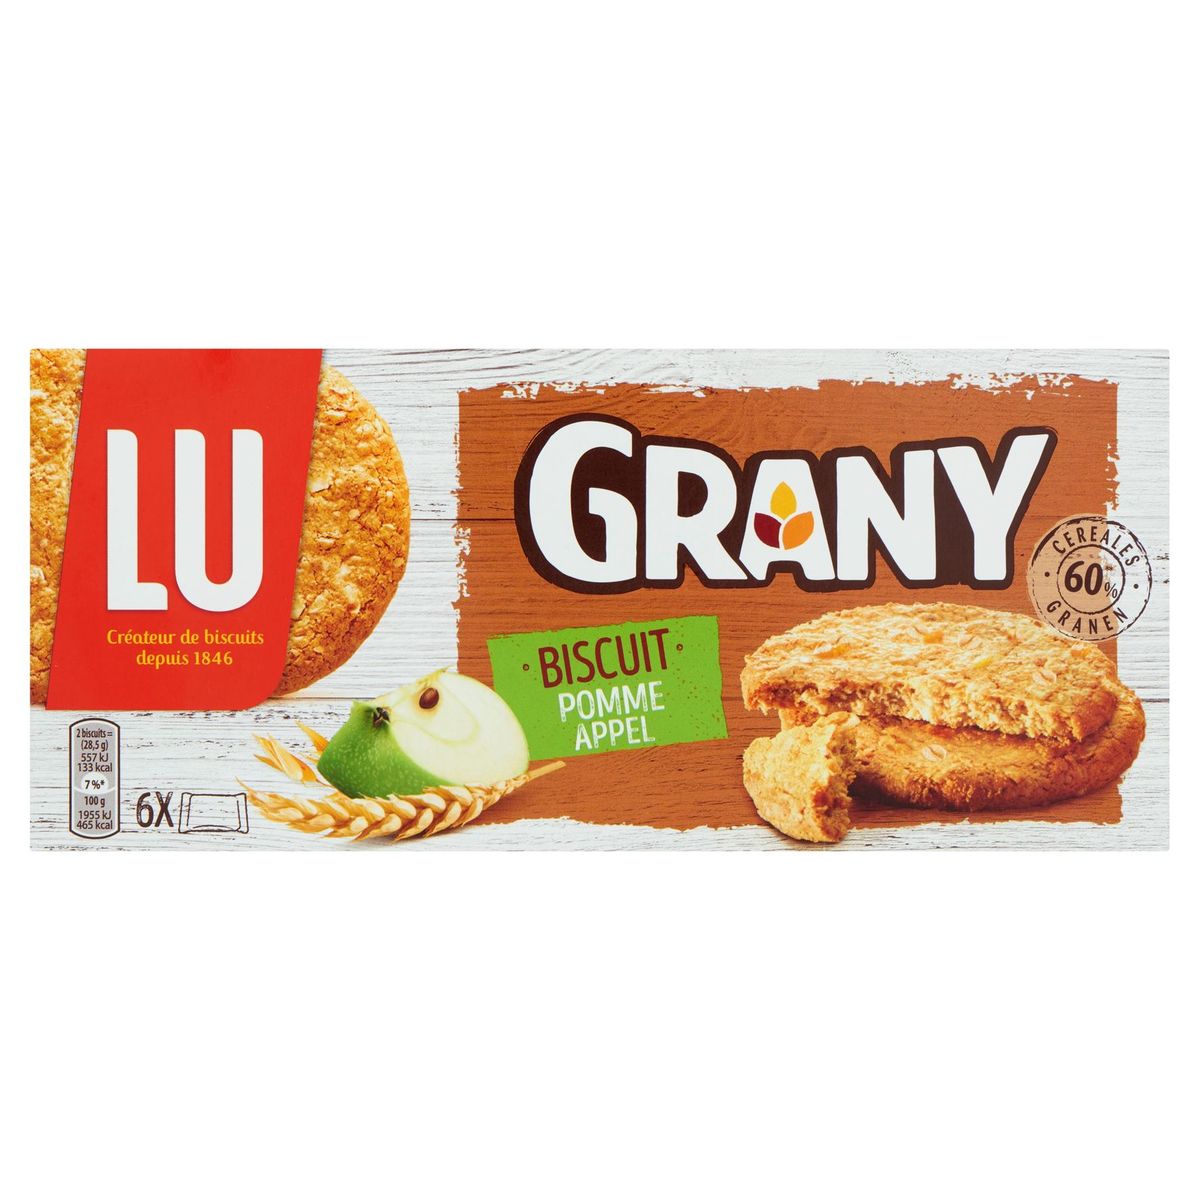 LU Grany Biscuits Pomme 6 Sachets 171 g